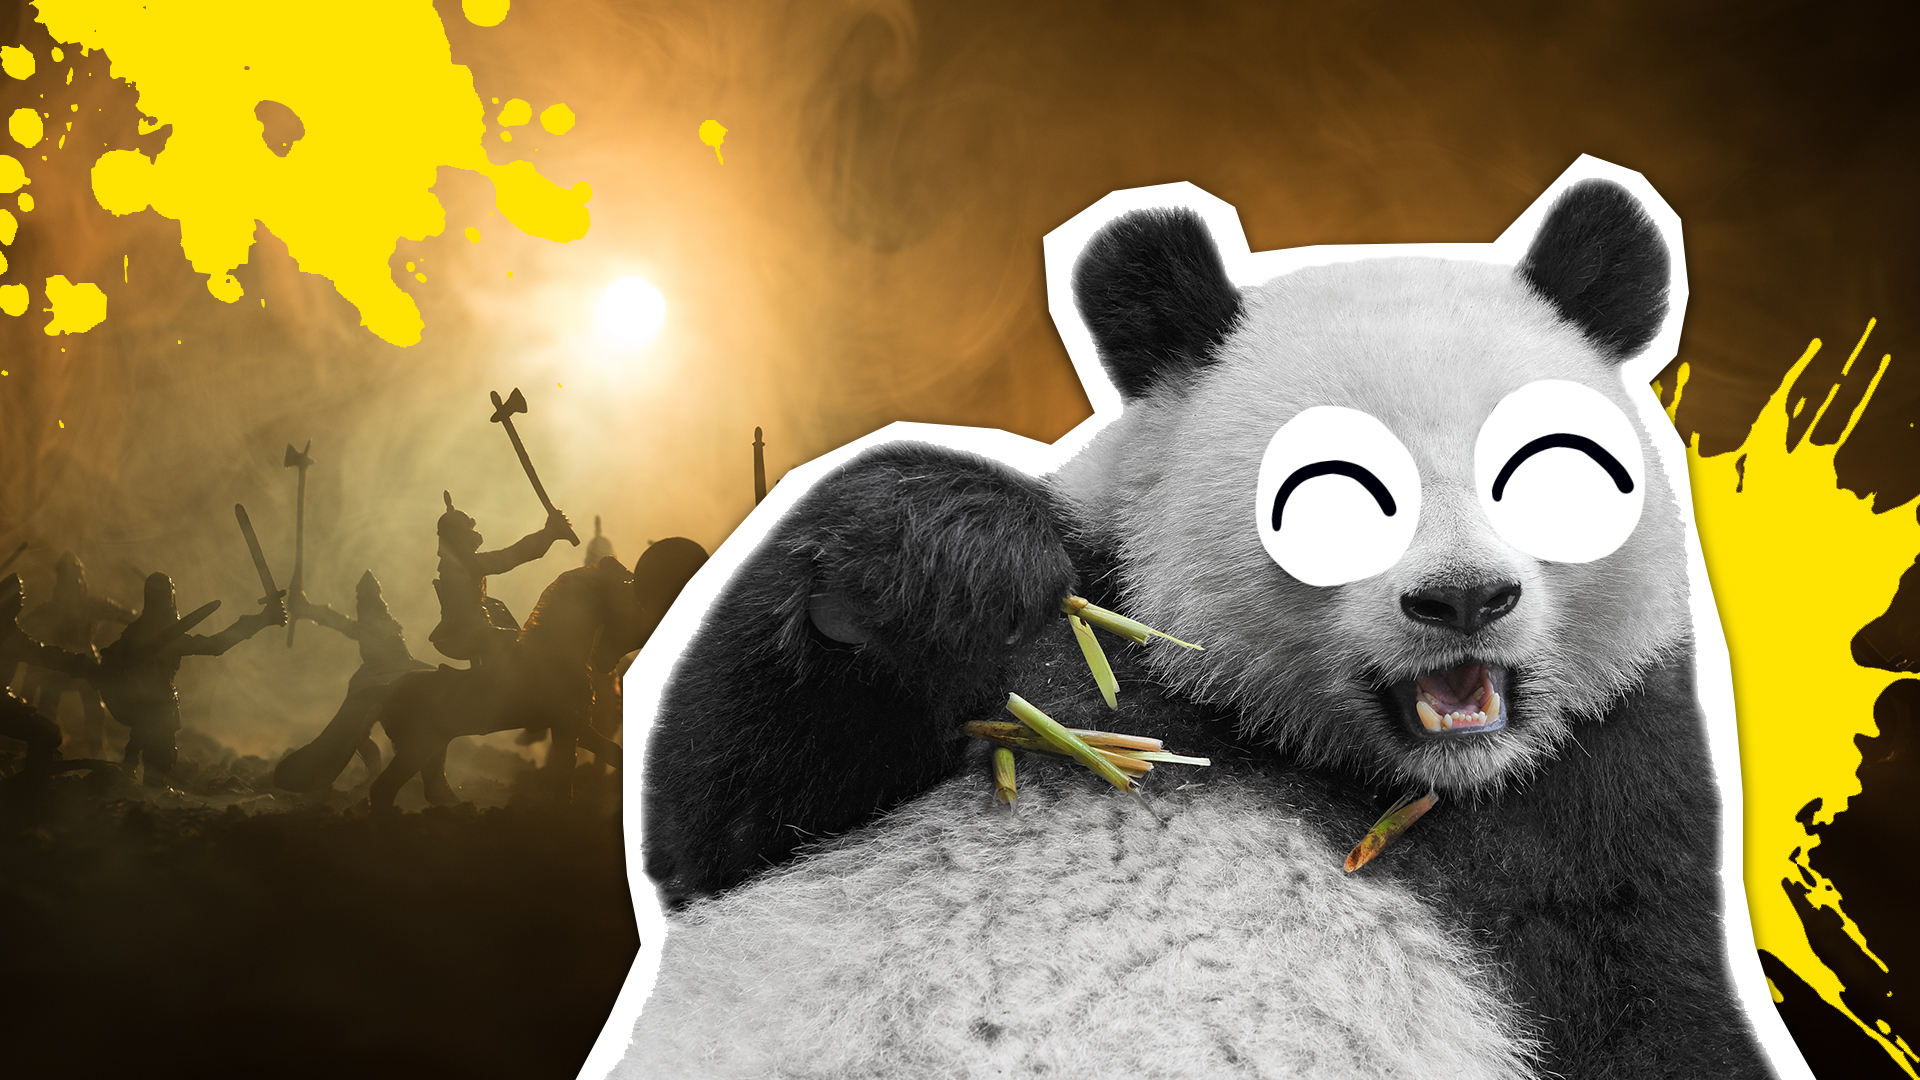 A panda eats bamboo with a backdrop of a medieval battle